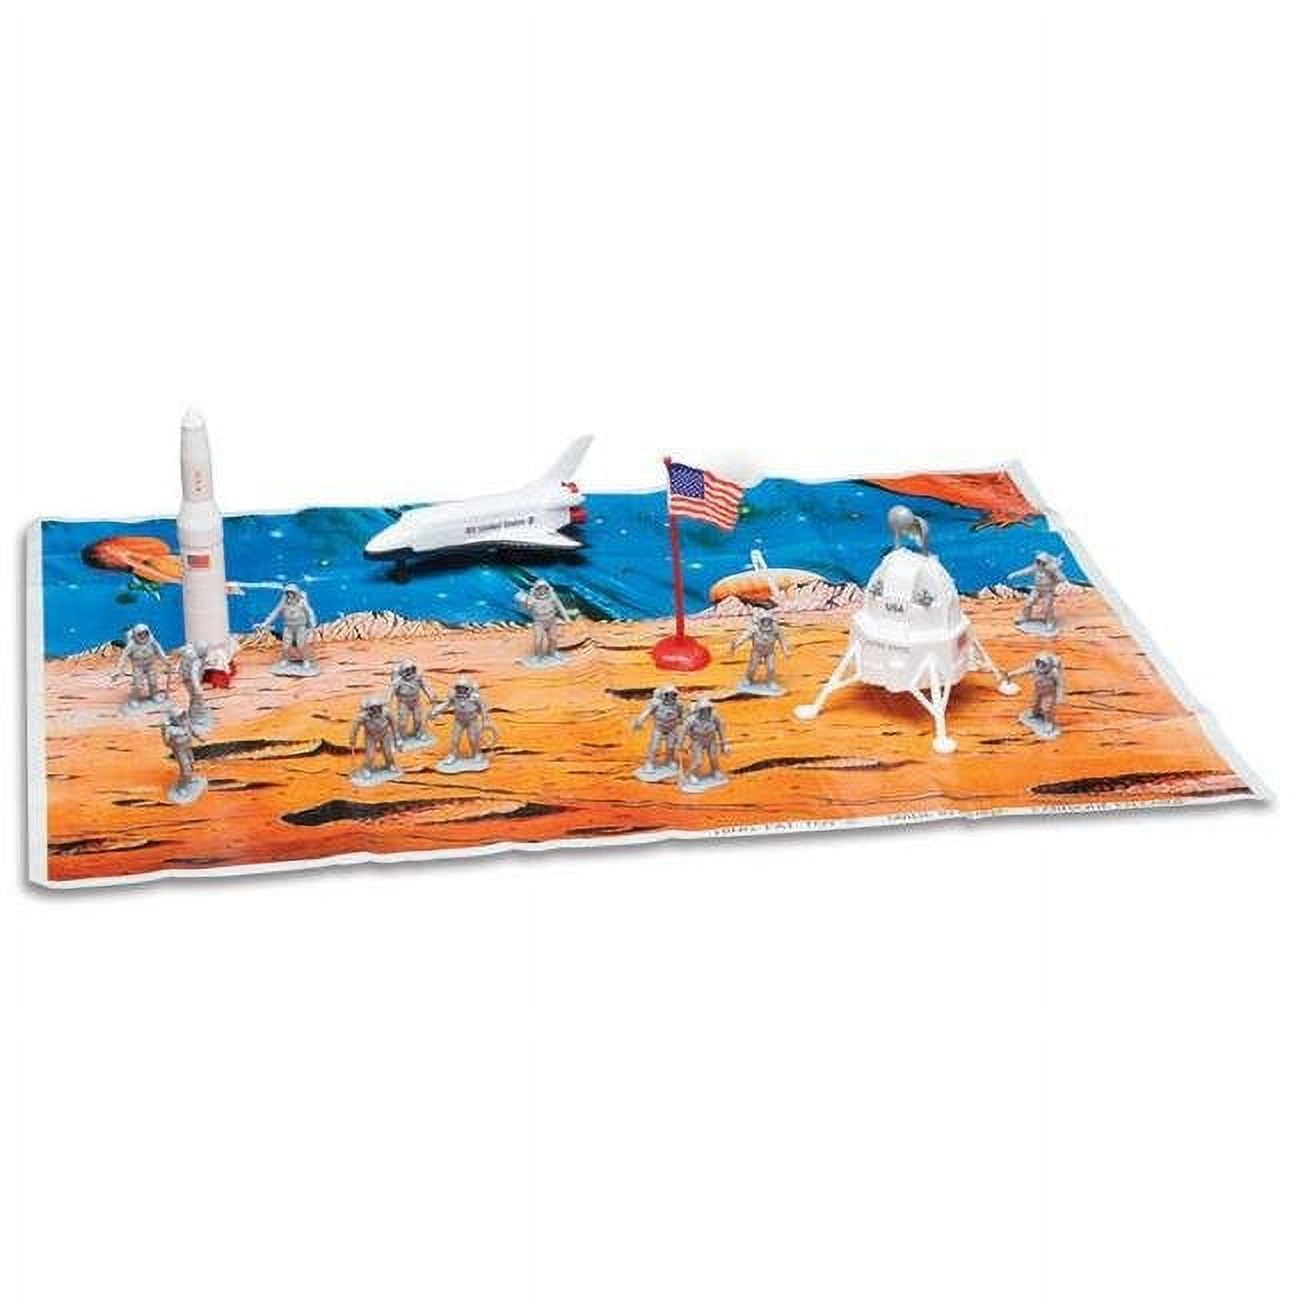 Space Adventure Hfl999 Space Exploration Playset With Playmat - 20 Piece